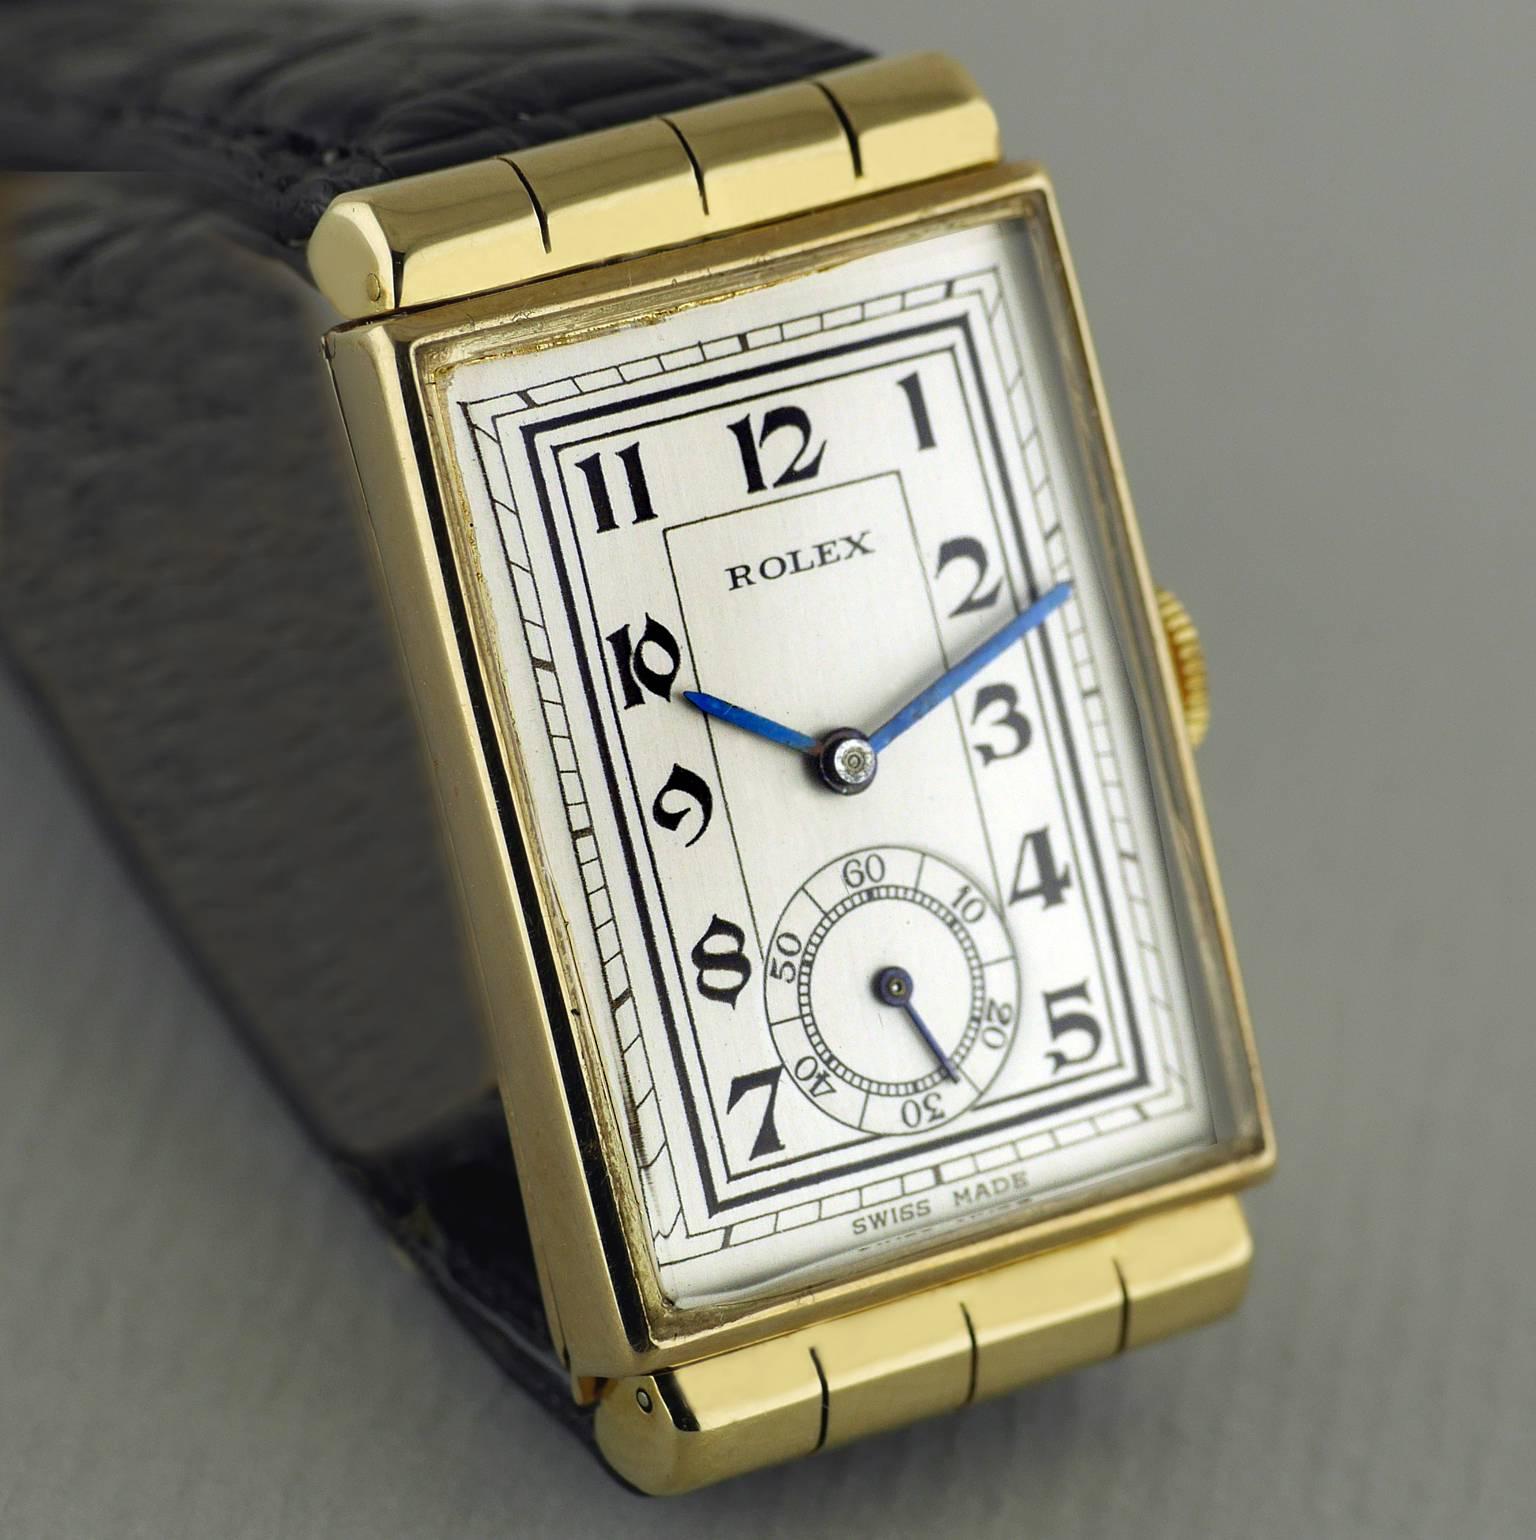 An Art Deco vintage wristwatch by Rolex made in 1937.

Gold case with rare and unusual hooded lugs, marked “RWC LTD” for the Rolex Watch Company Ltd  and “27 Records Universels”. Hallmarked for Glasgow import into the United Kingdom in 1937. Snap